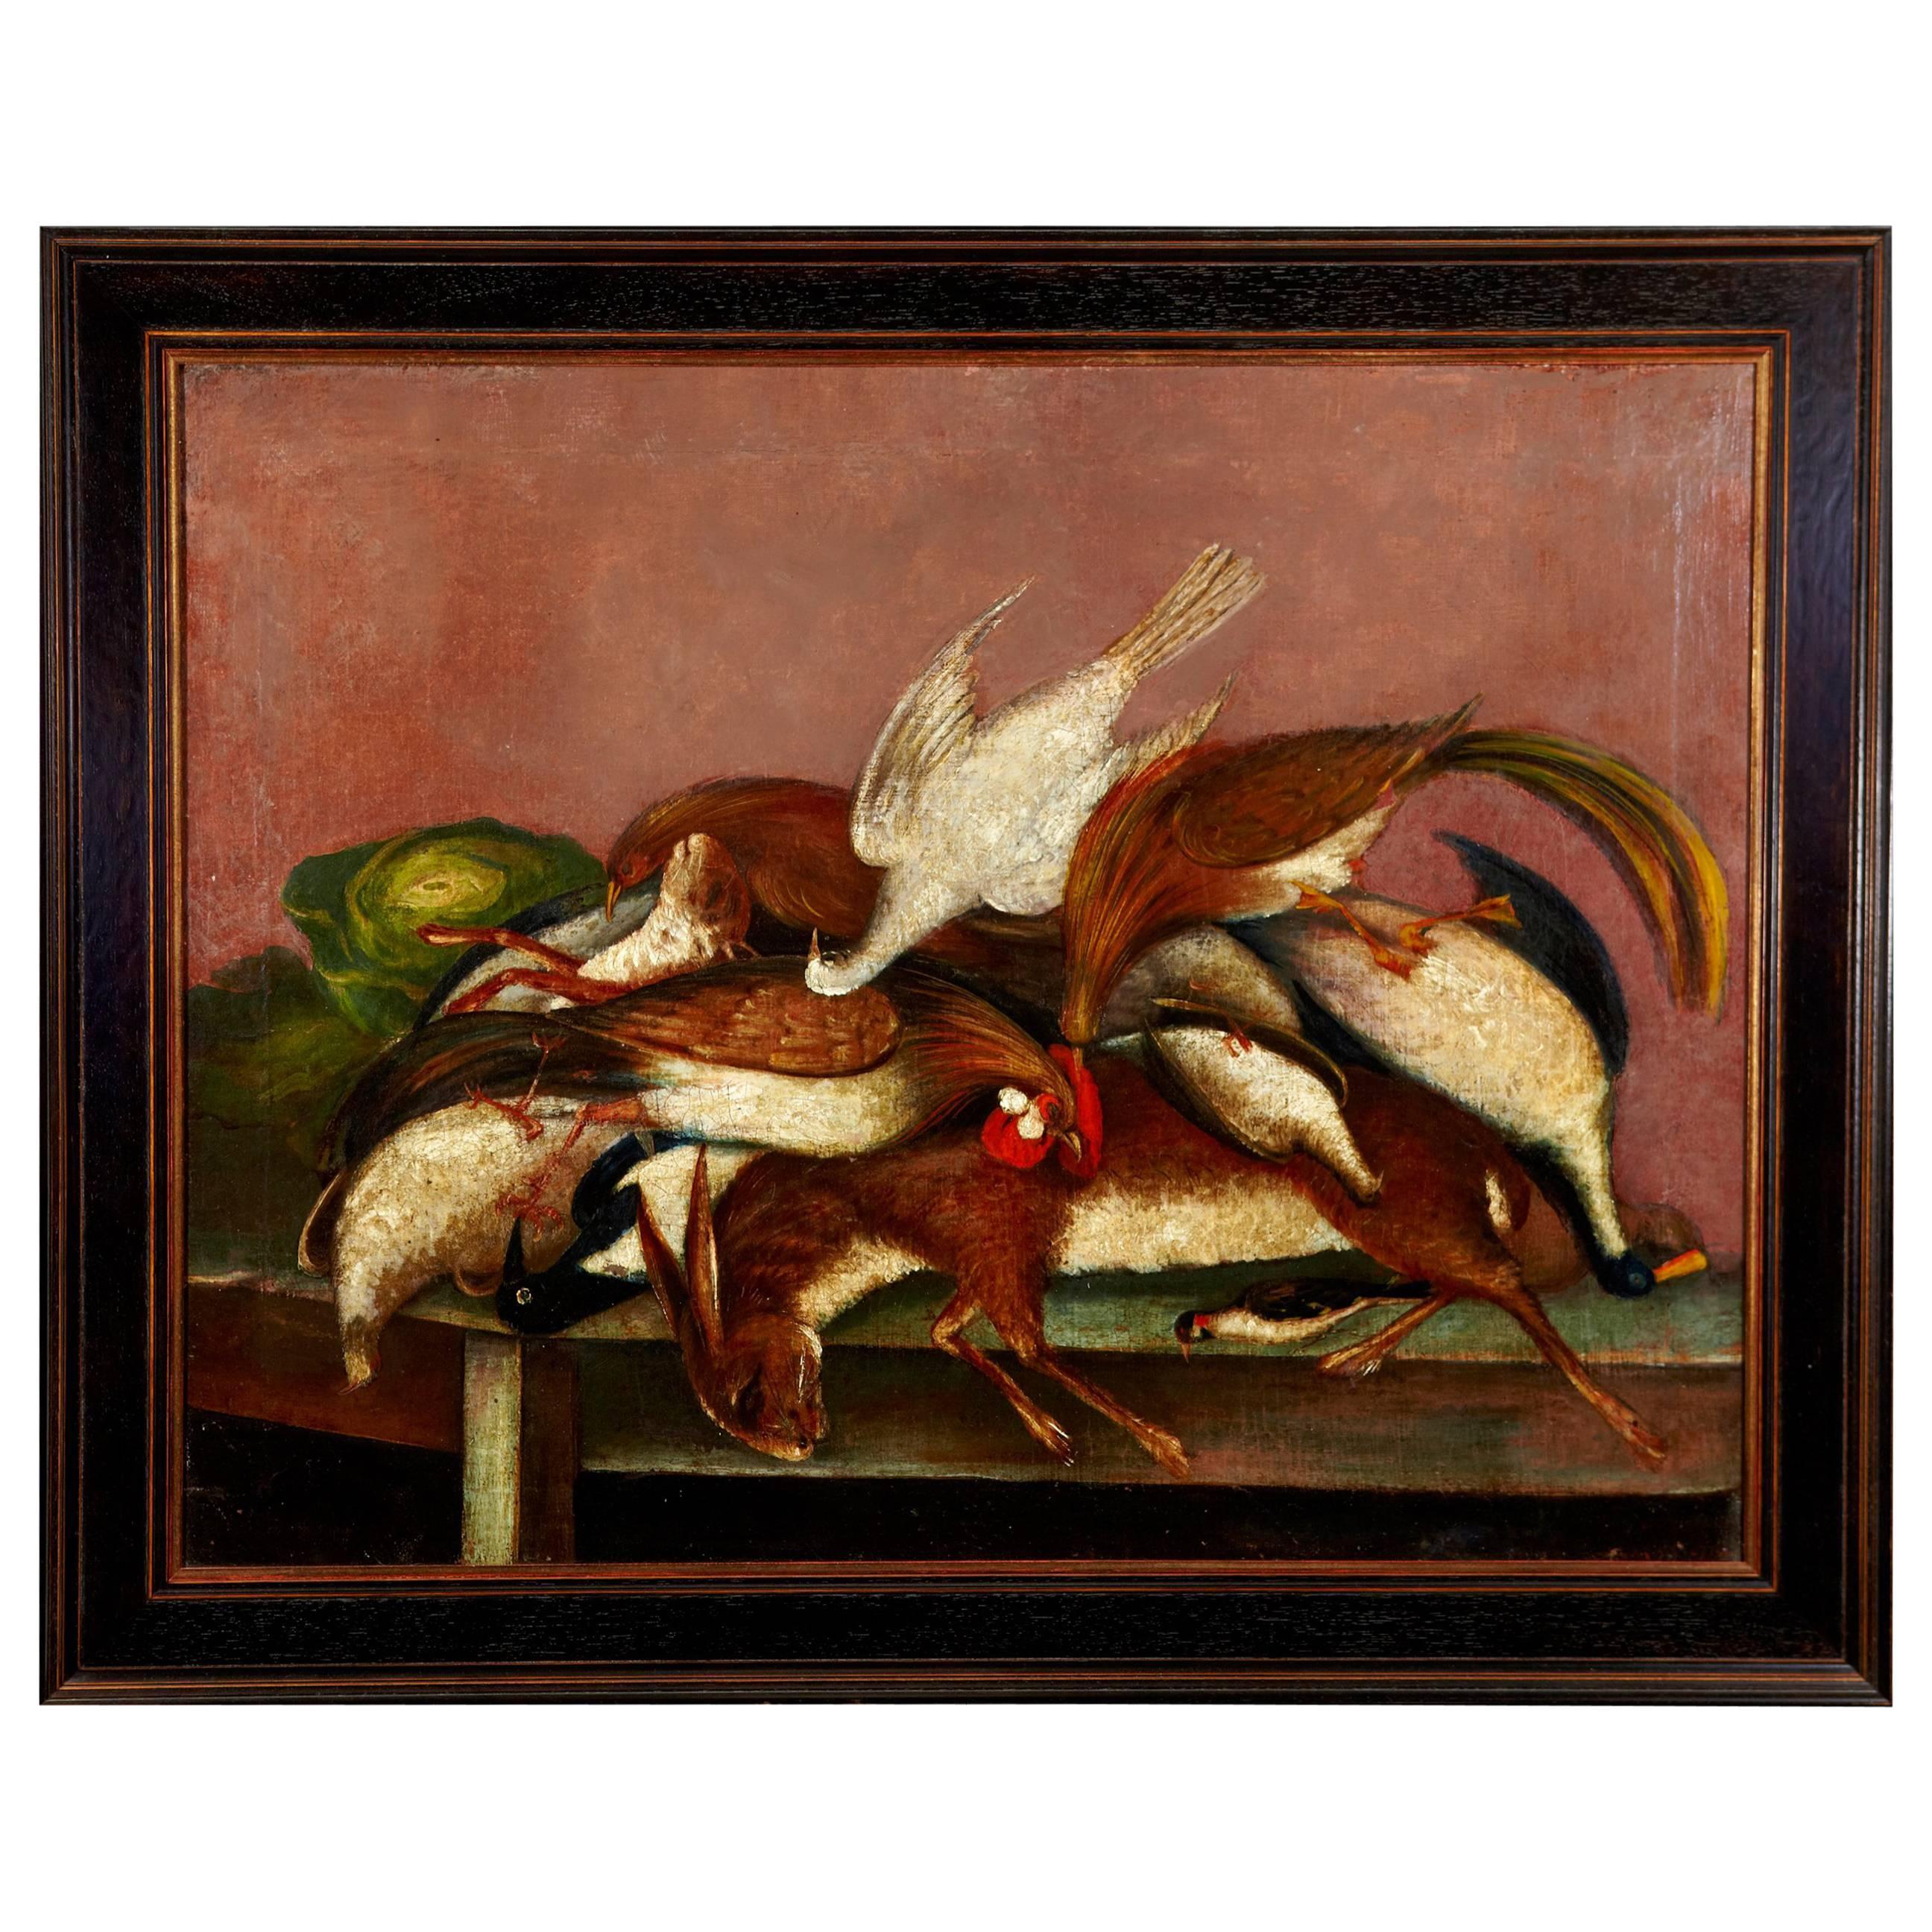 Early 18th century museum quality Nature Morte still life Dutch or French oil painting.

This Nature Morte painting has all the Classic attributes or a masterpiece showing various game animals such as deer, rabbit, duck, snipes, pigeon and a dove.